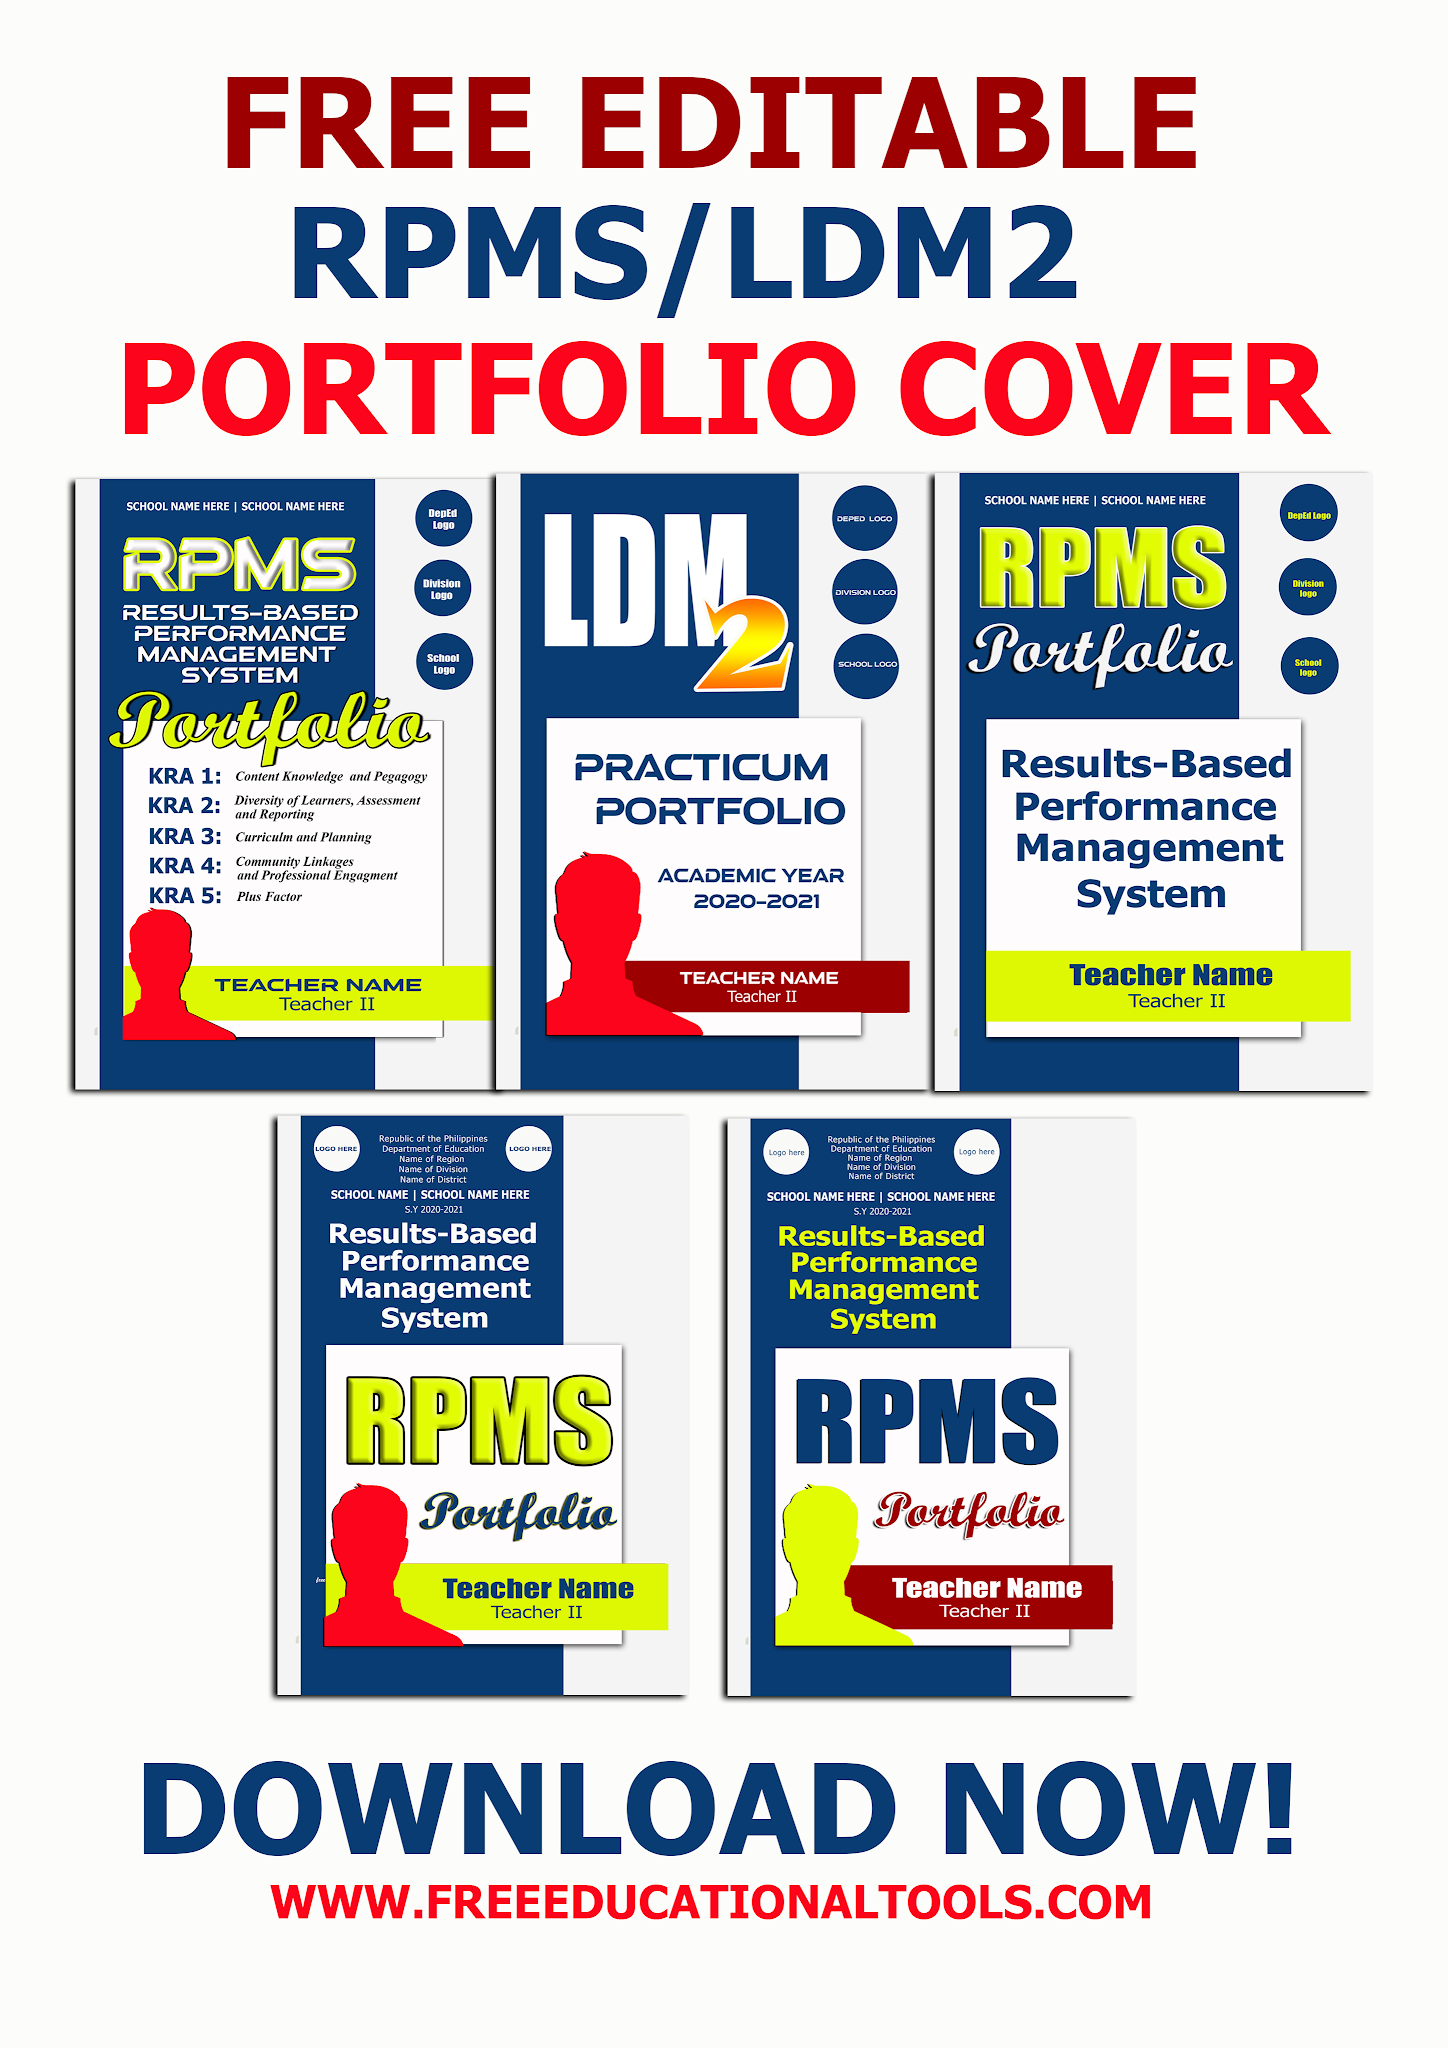 DOWNLOAD FREE EDITABLE COVER FOR RPMS | LDM 2 PORTFOLIO SY 2021-2022